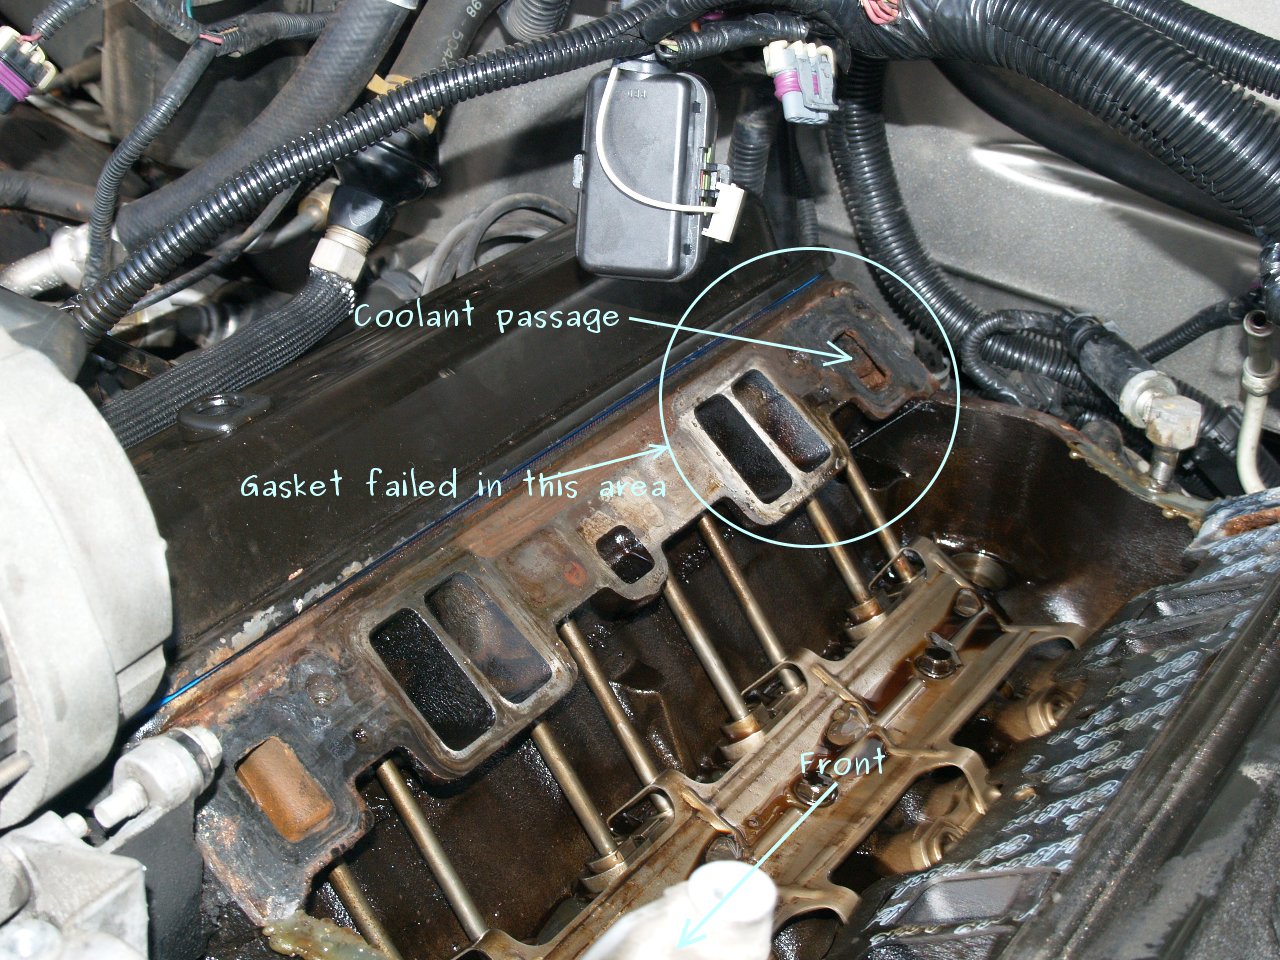 See P05C0 in engine